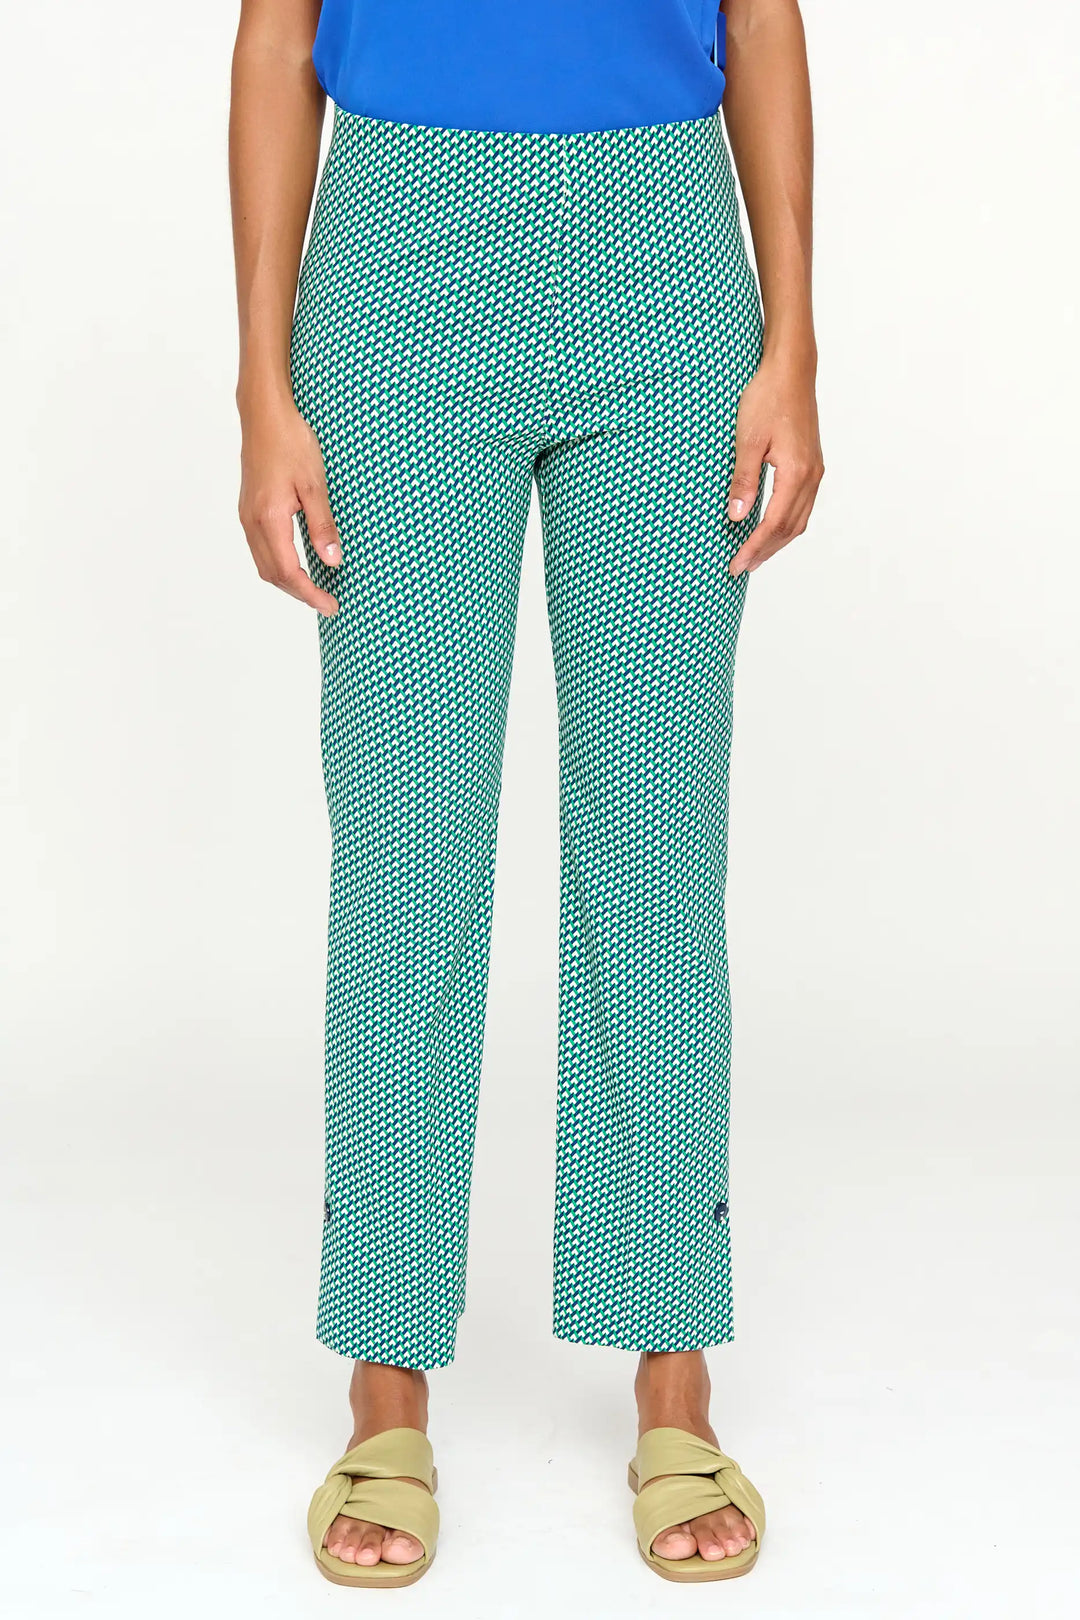 Front view of 'Donora' style trousers with a green and white geometric print, slim fit, cropped length, paired with olive green sandals.